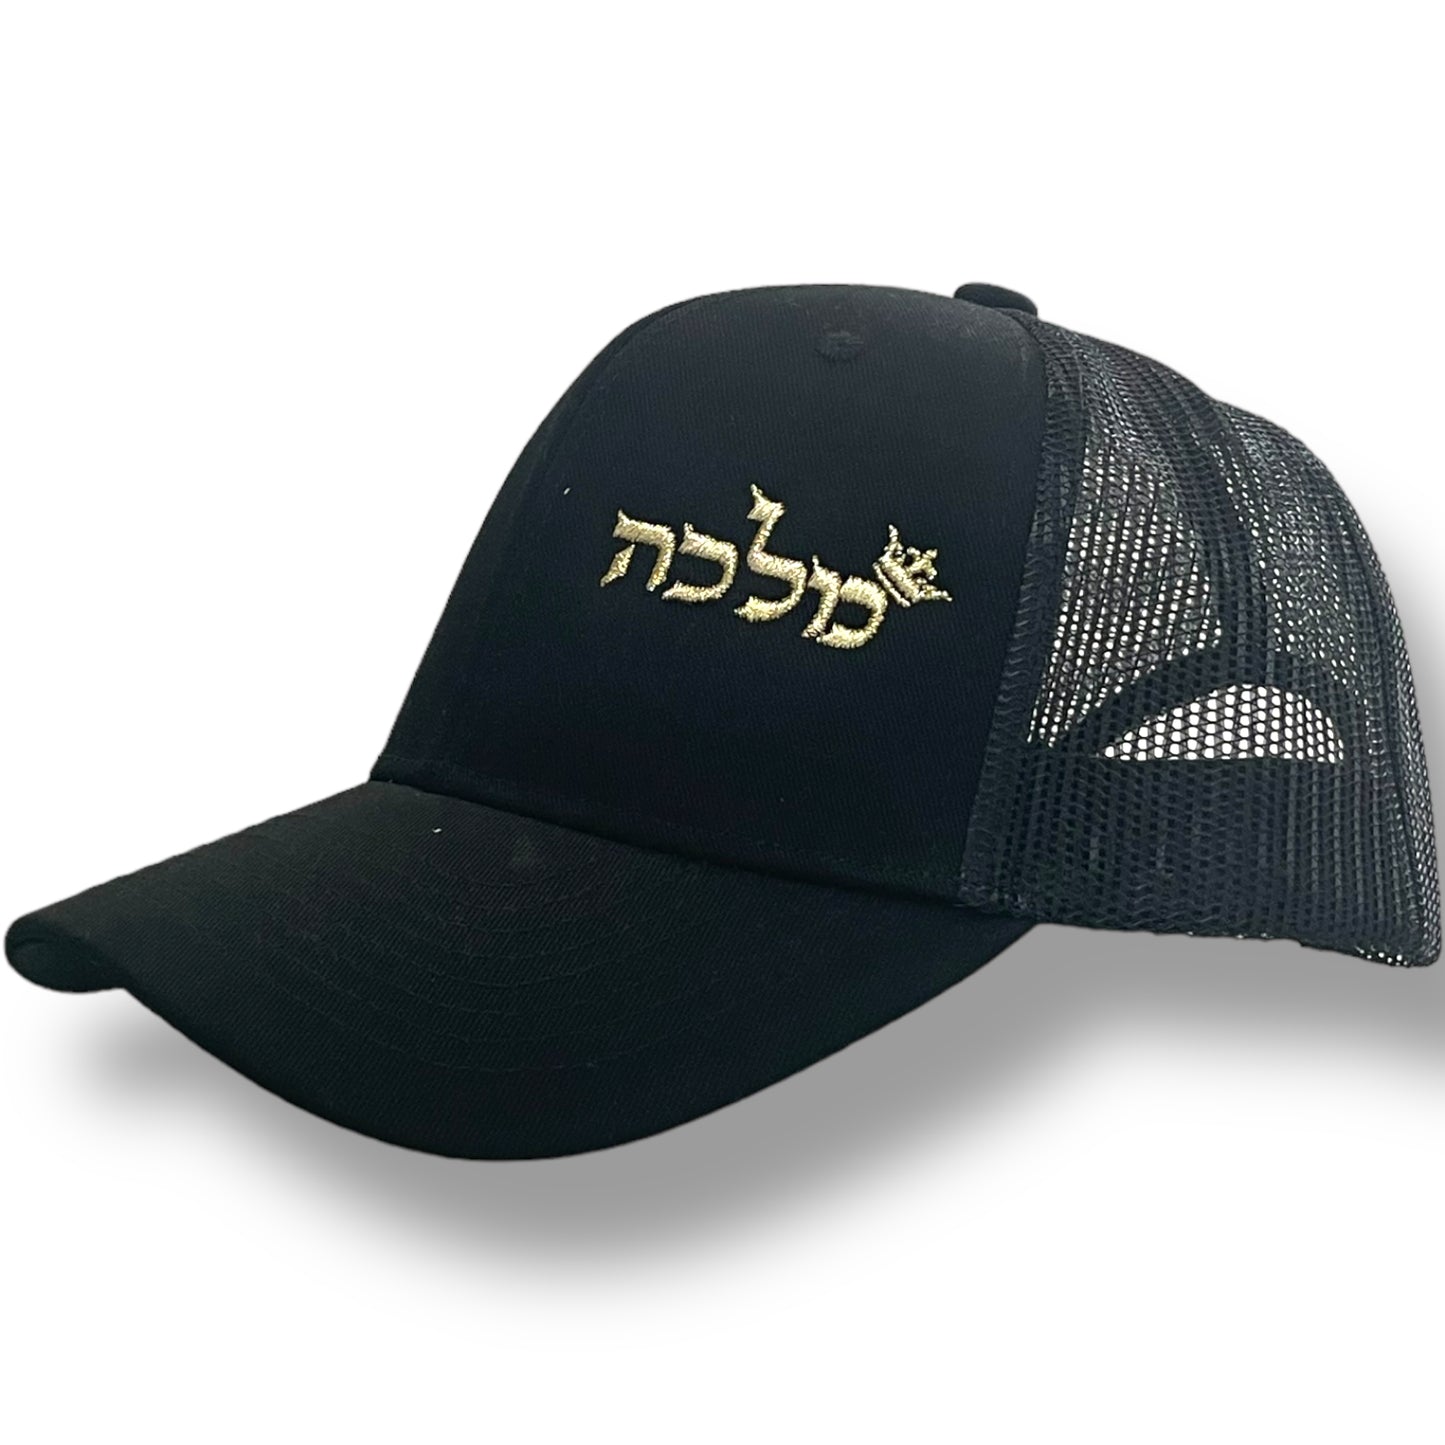 Queen מלכה  - Novelty Baseball Cap with Embroidered with crown Design - One Size Fits Most